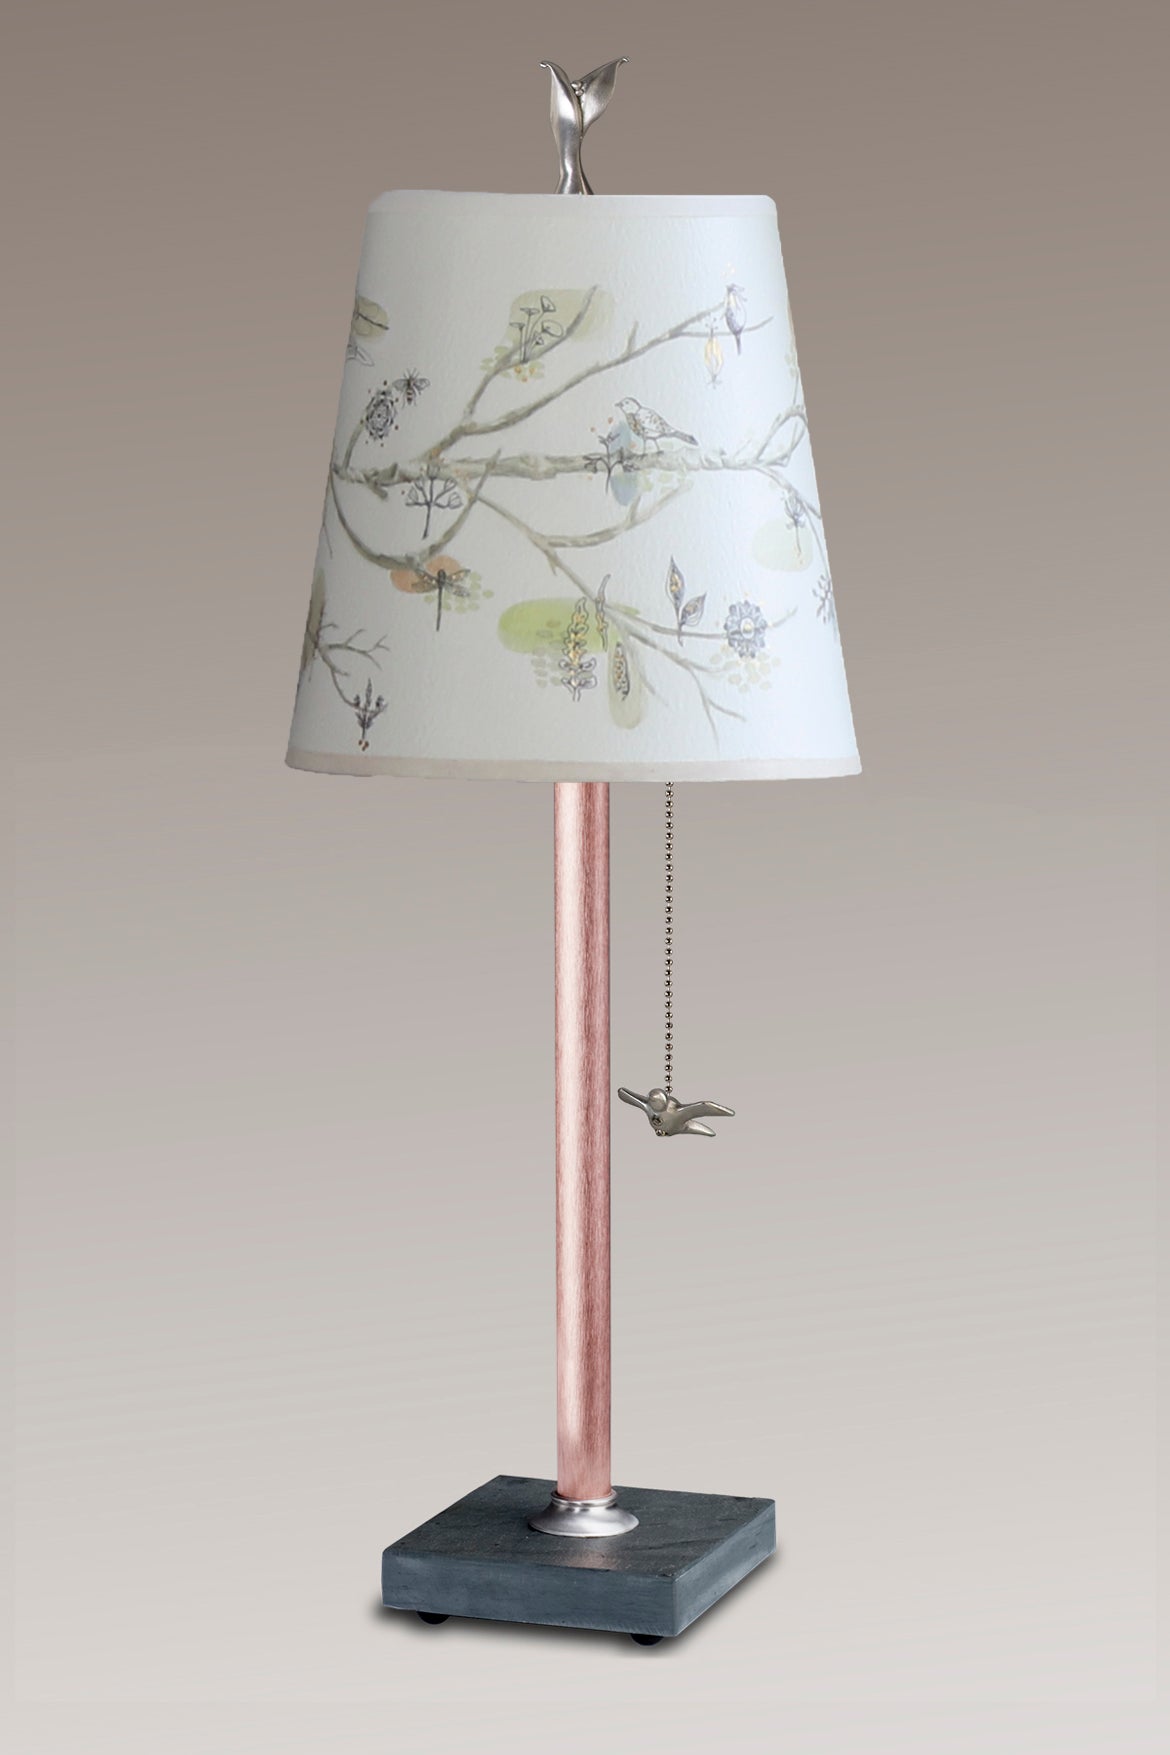 Janna Ugone & Co Table Lamps Copper Table Lamp with Small Drum Shade in Artful Branch